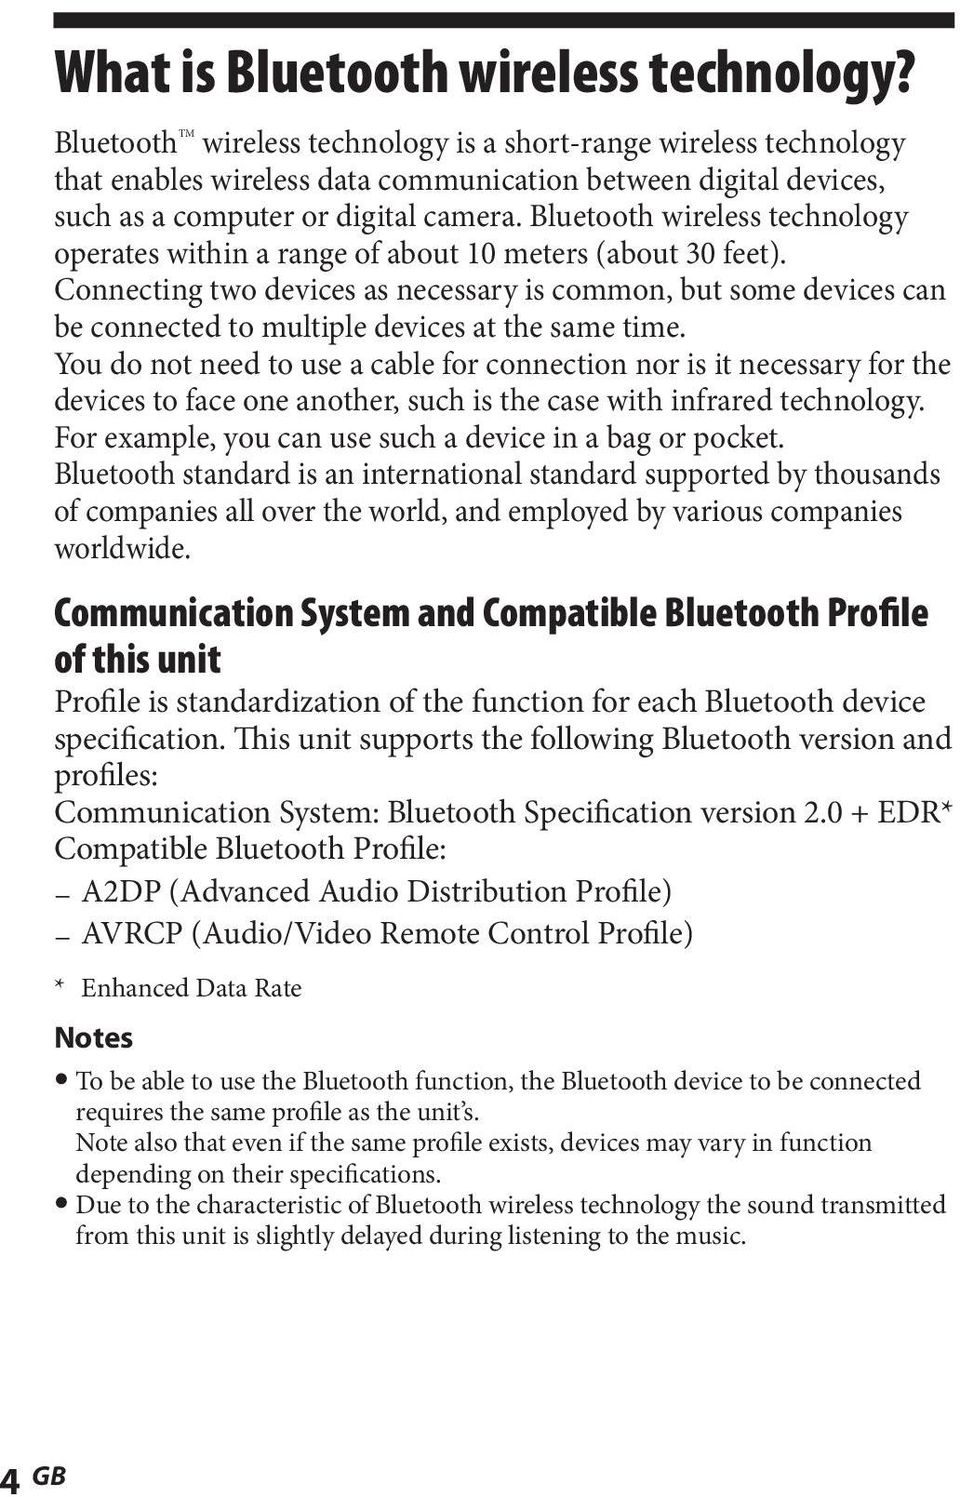 Bluetooth wireless technology operates within a range of about 10 meters (about 30 feet).